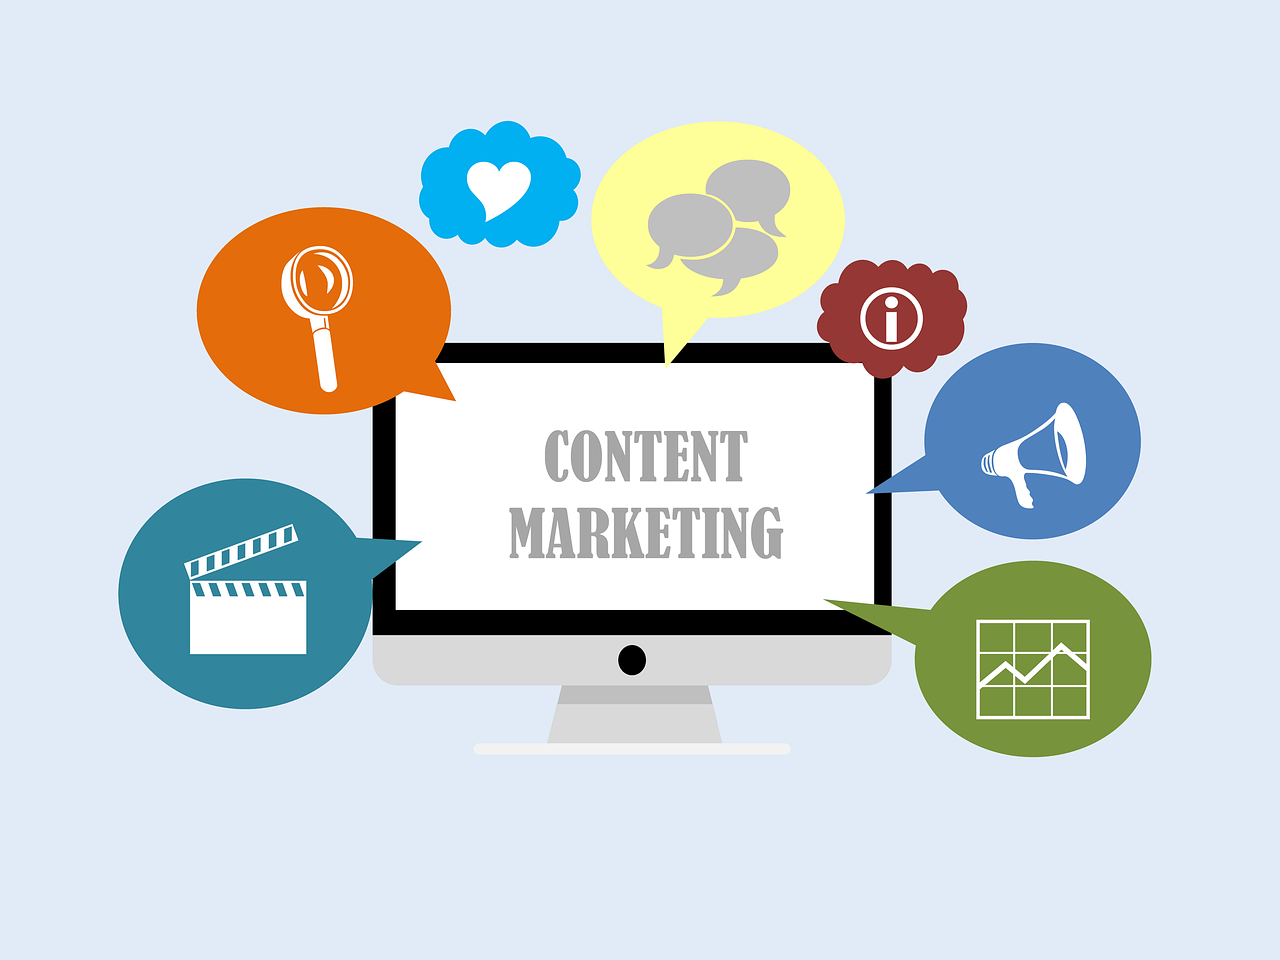 4 Tips for Generating Leads through Content Marketing